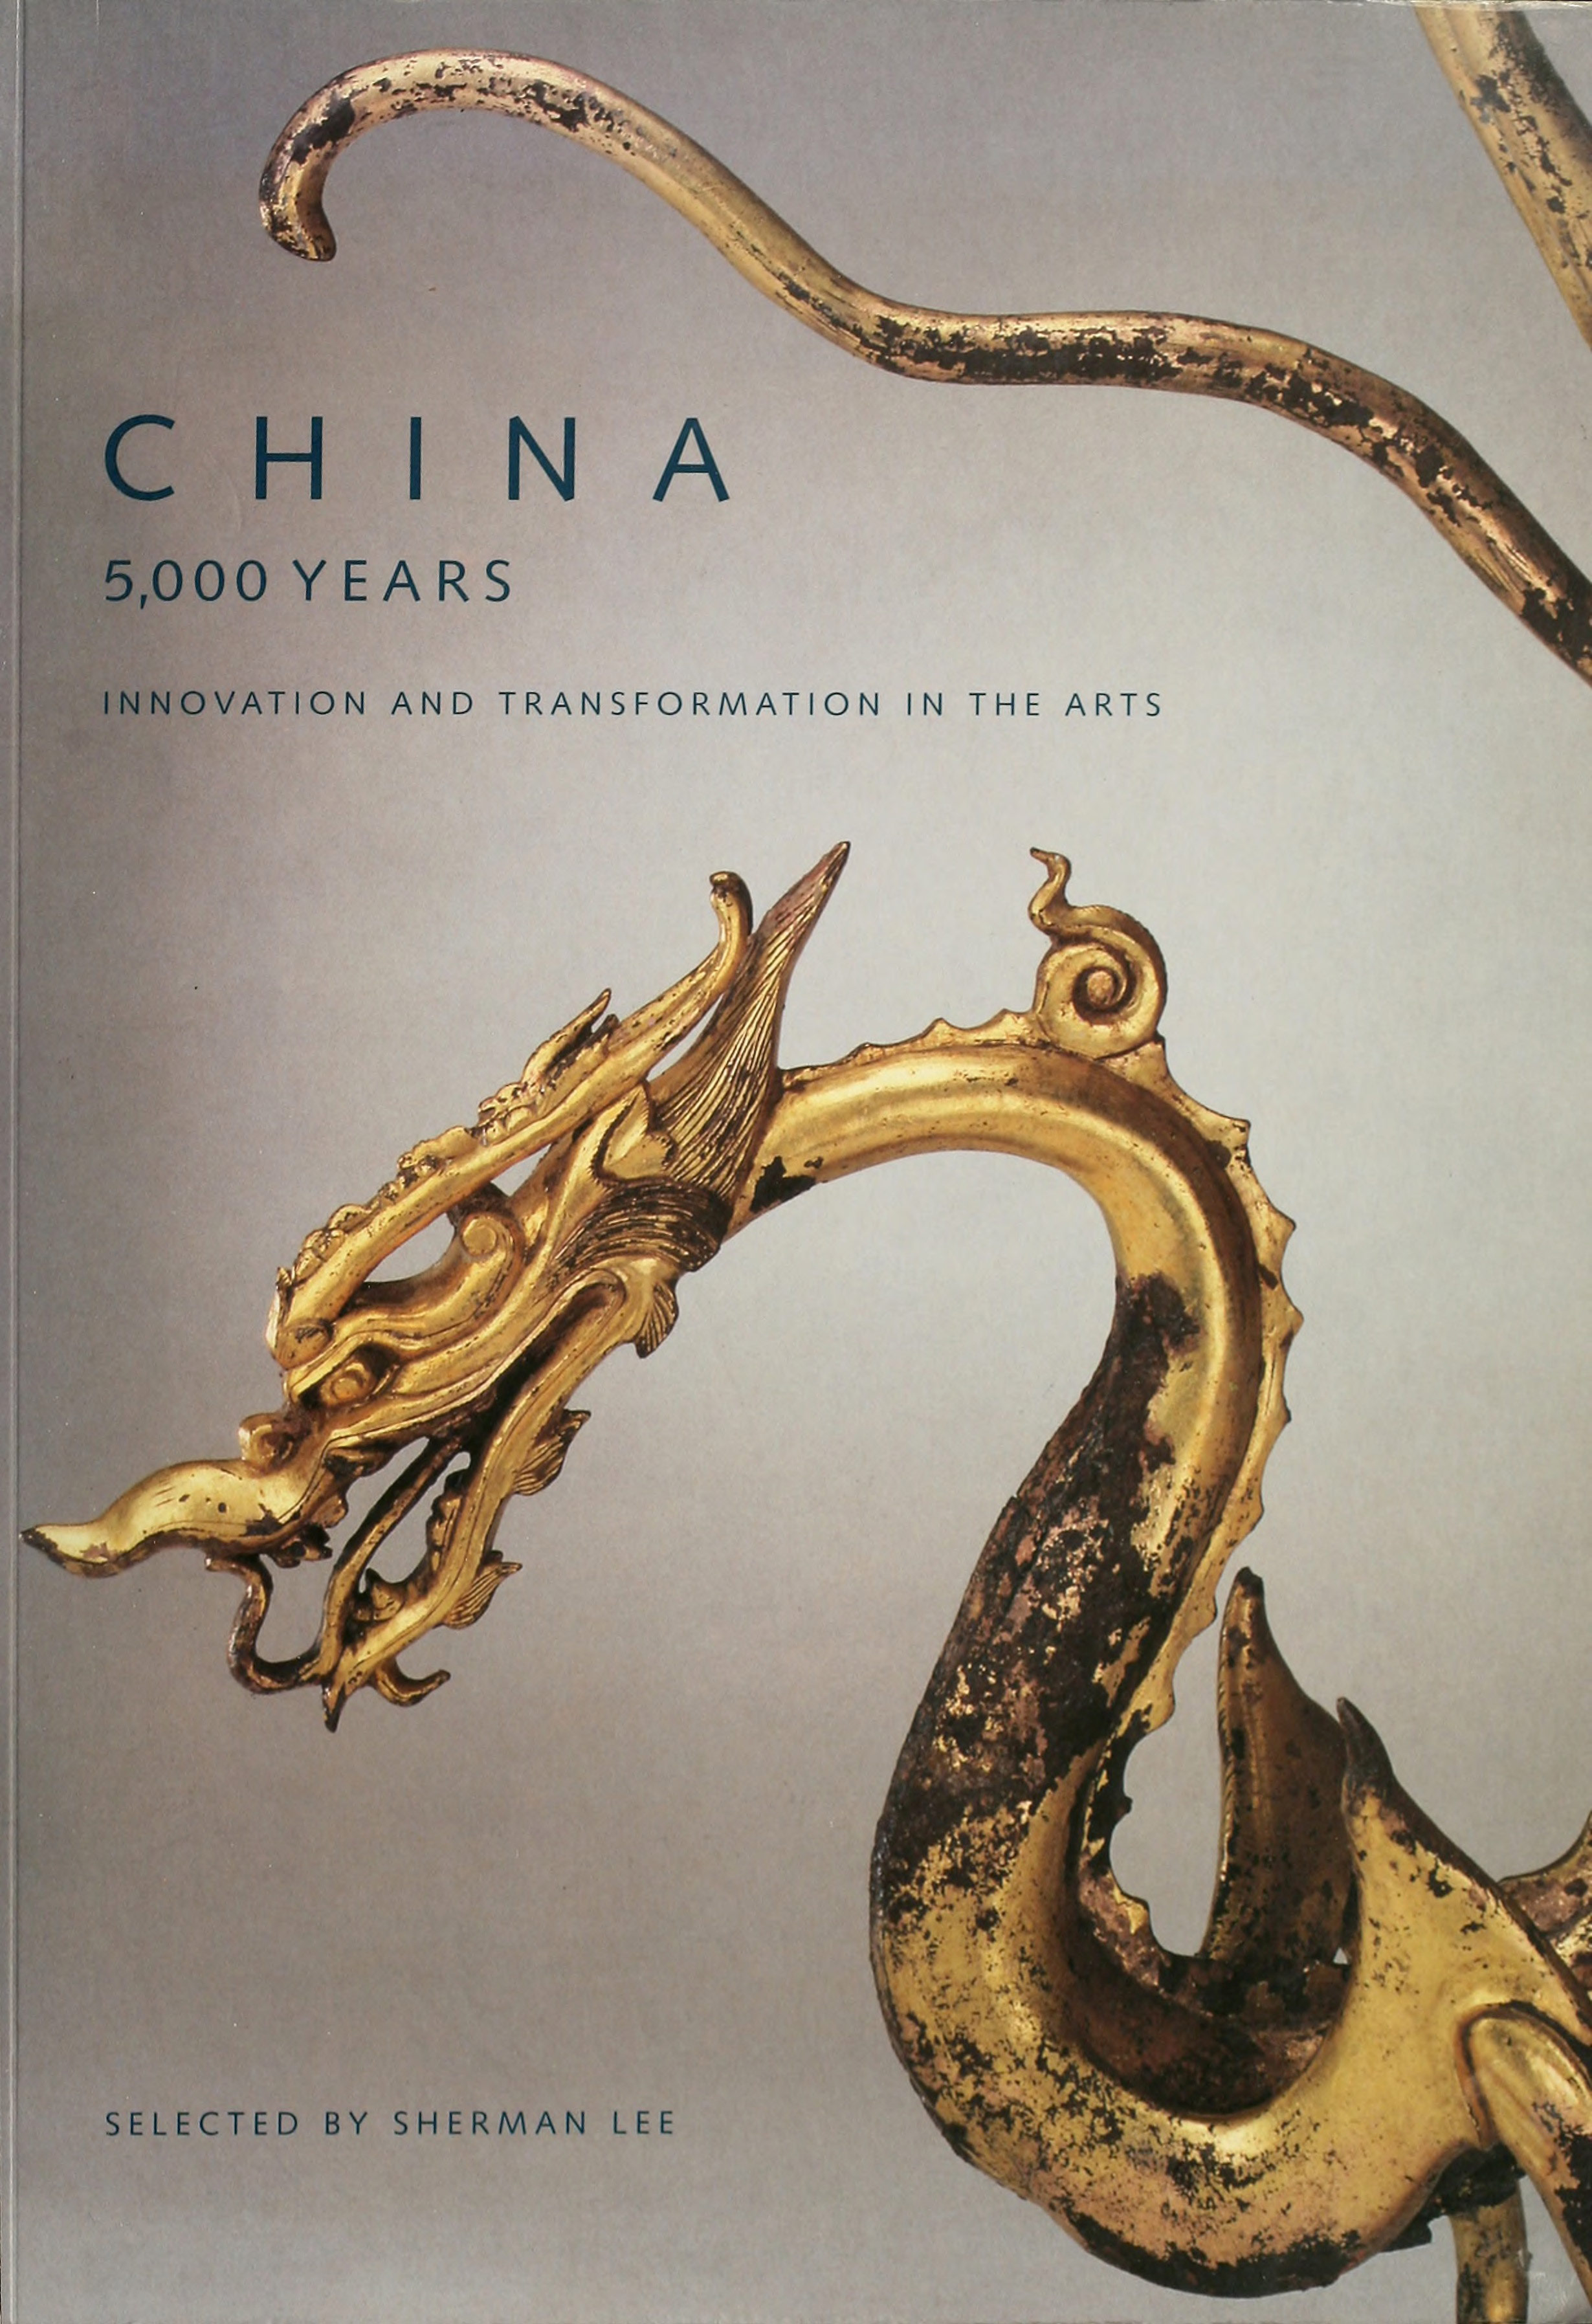 China: 5,000 Years, Innovation and Transformation in the Arts